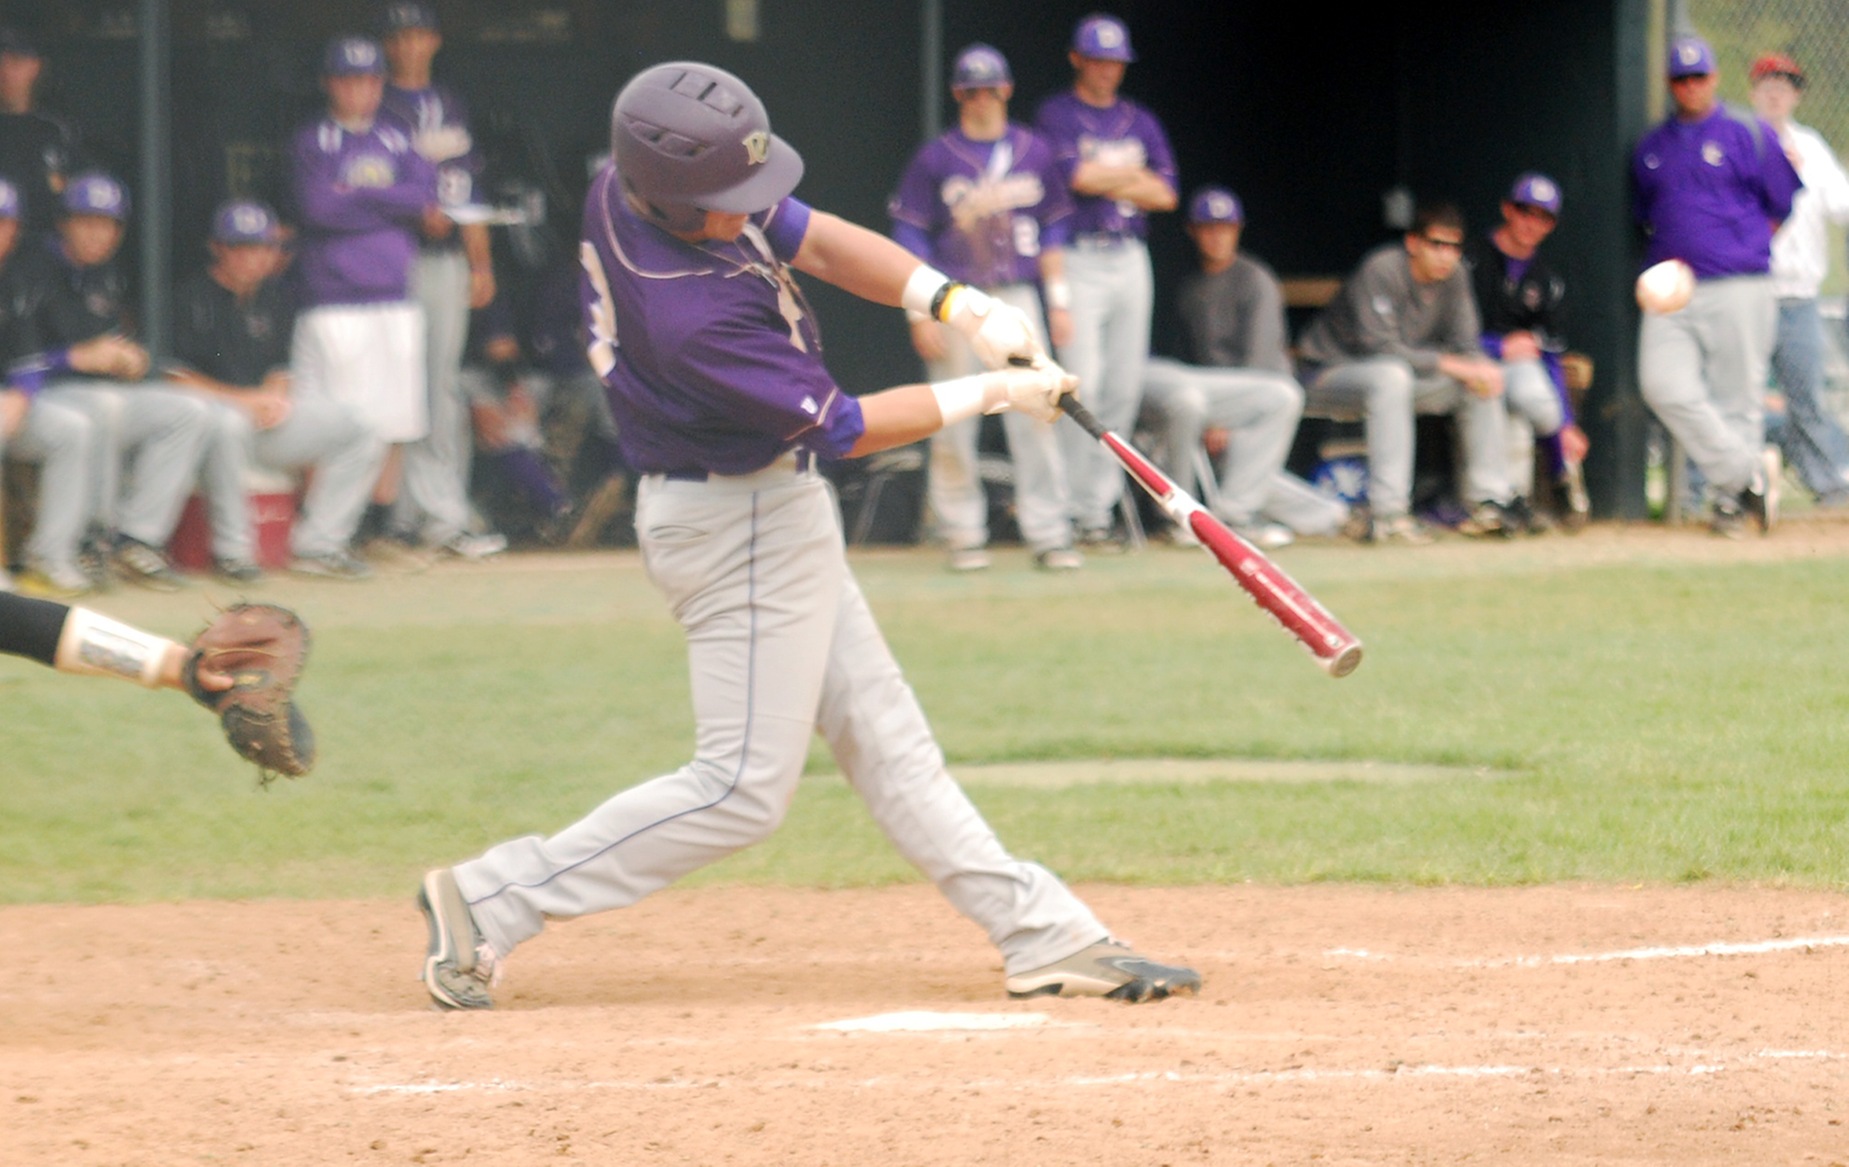 DC's Kremer Hits for Cycle in Loss to Transylvania